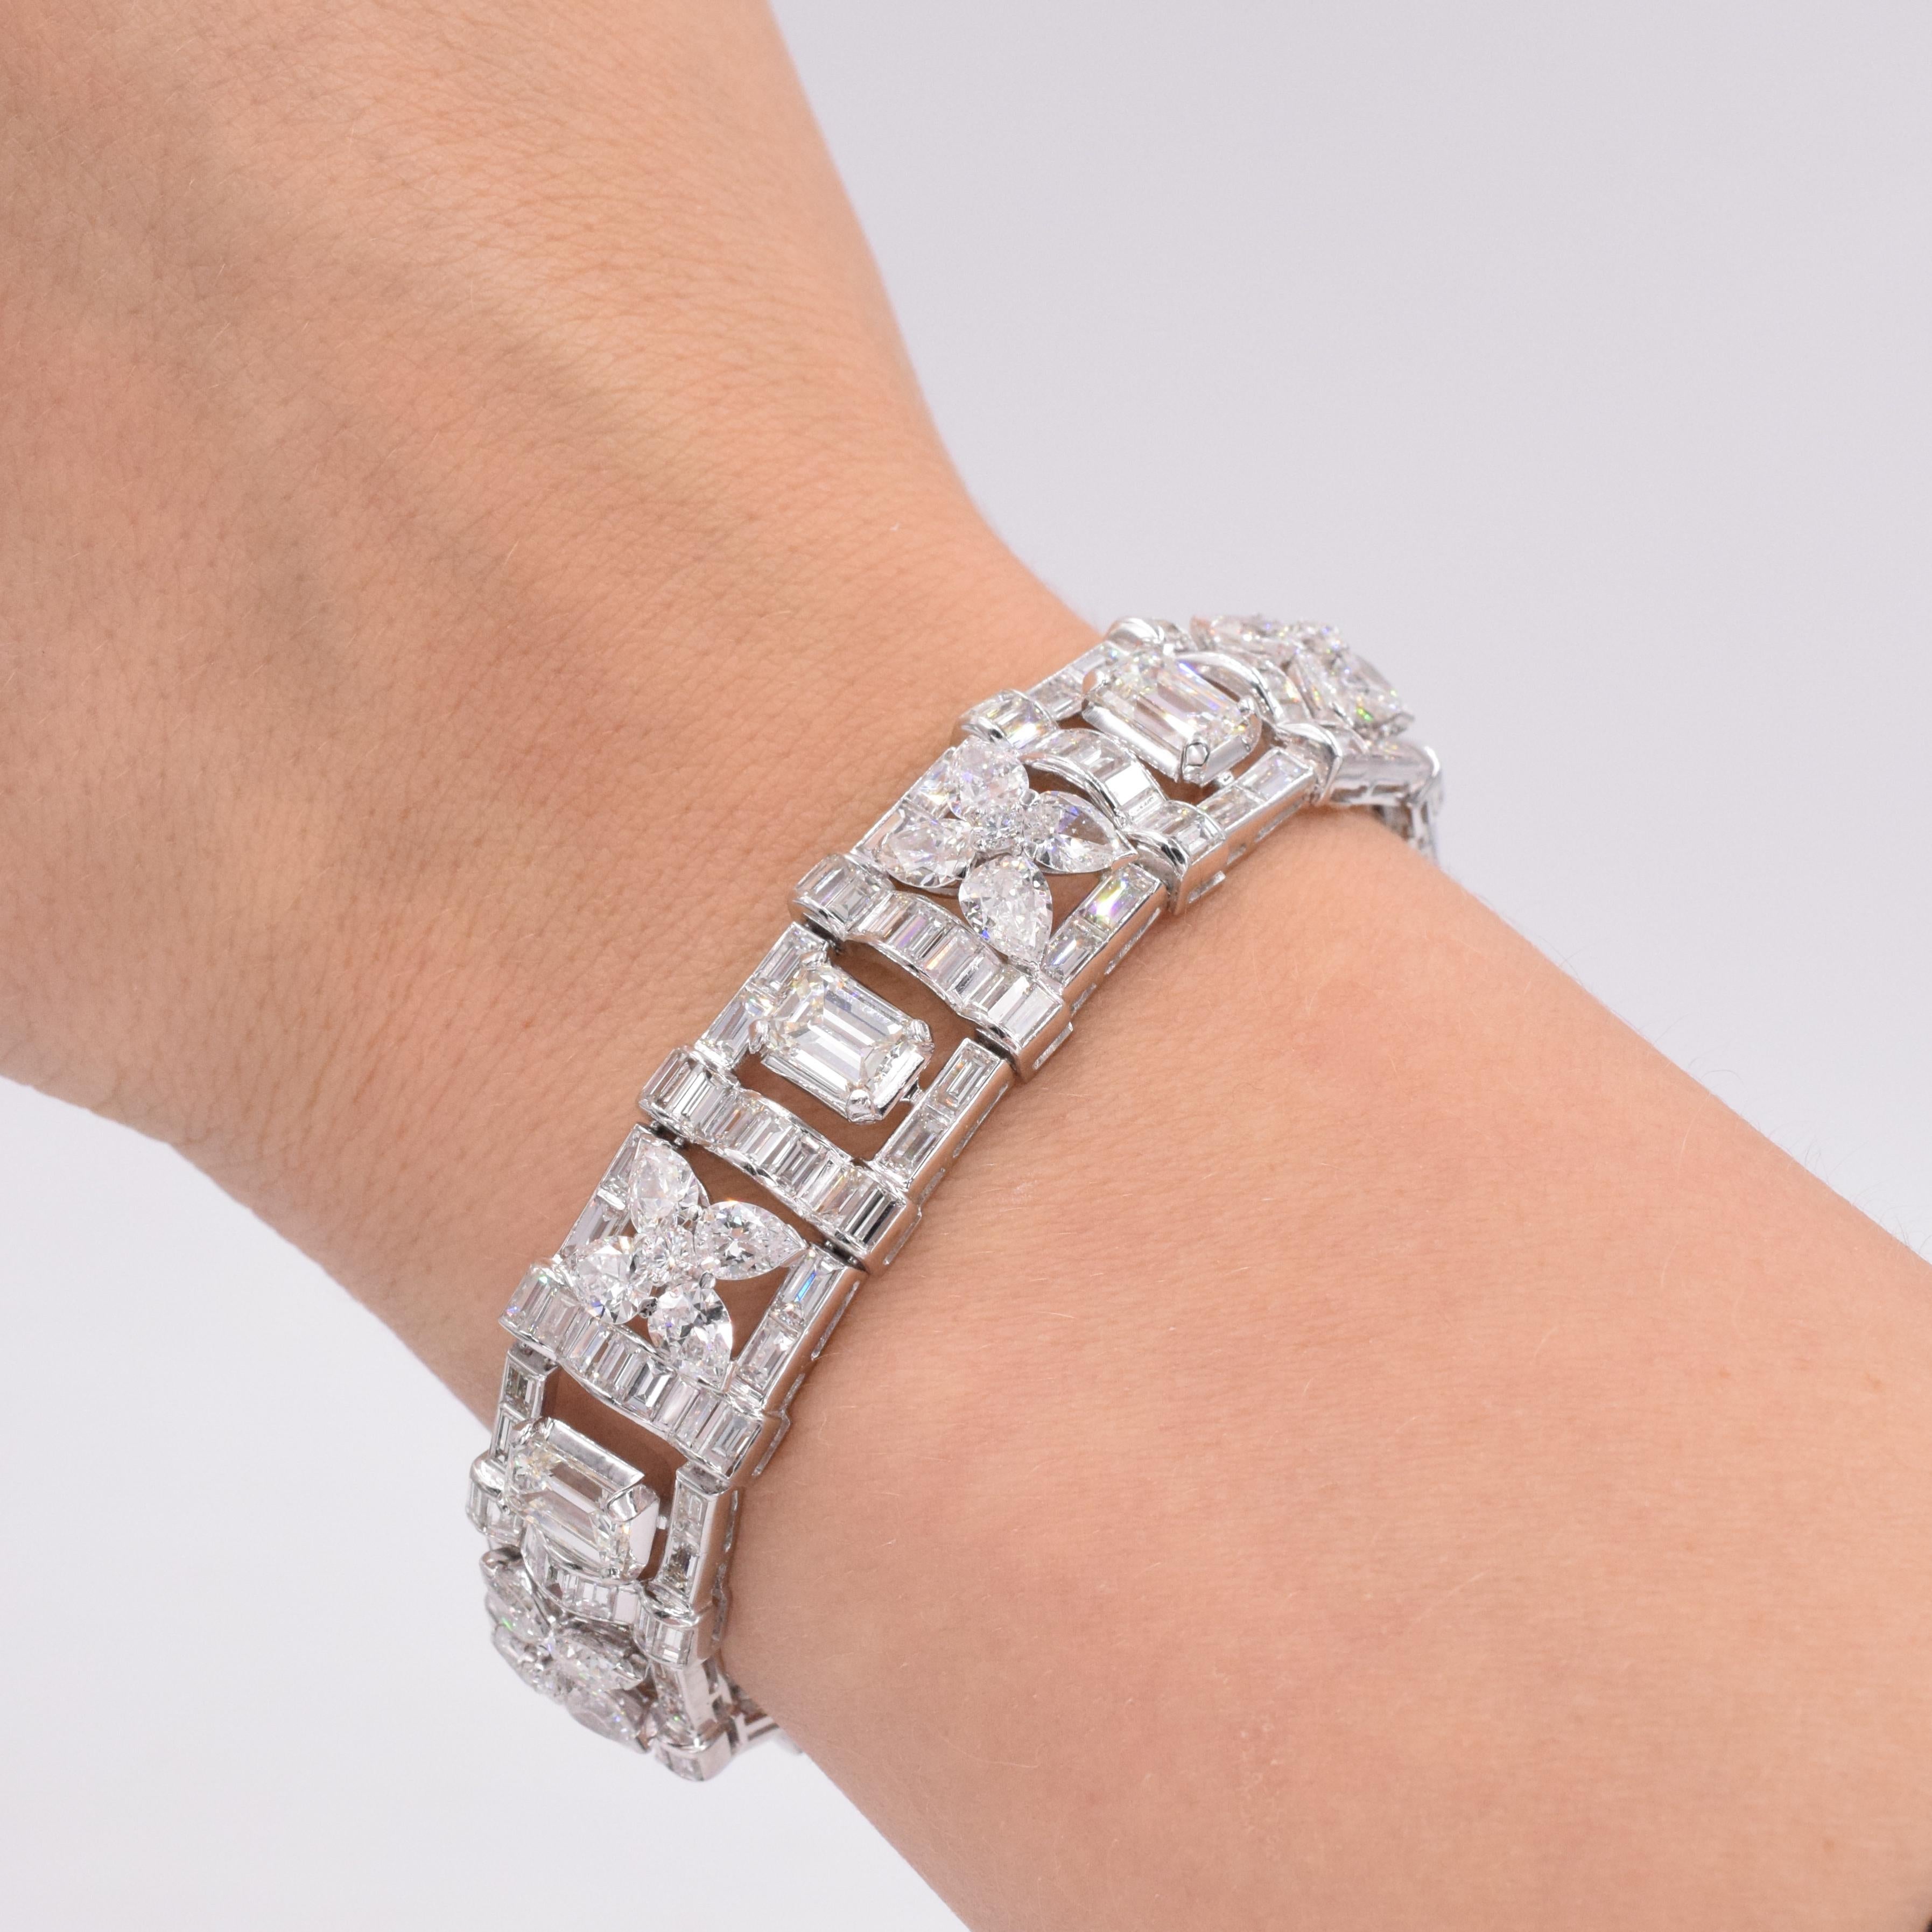 Impressive Cartier Diamond Bracelet circa 1960's
 with marquise, emerald and baguette shape diamonds with a total carat weight of approximately 30carats.  (Seven large Emerald cut diamonds, each one is 0.80-0.90 carat.)
Diamonds are Near Colorless